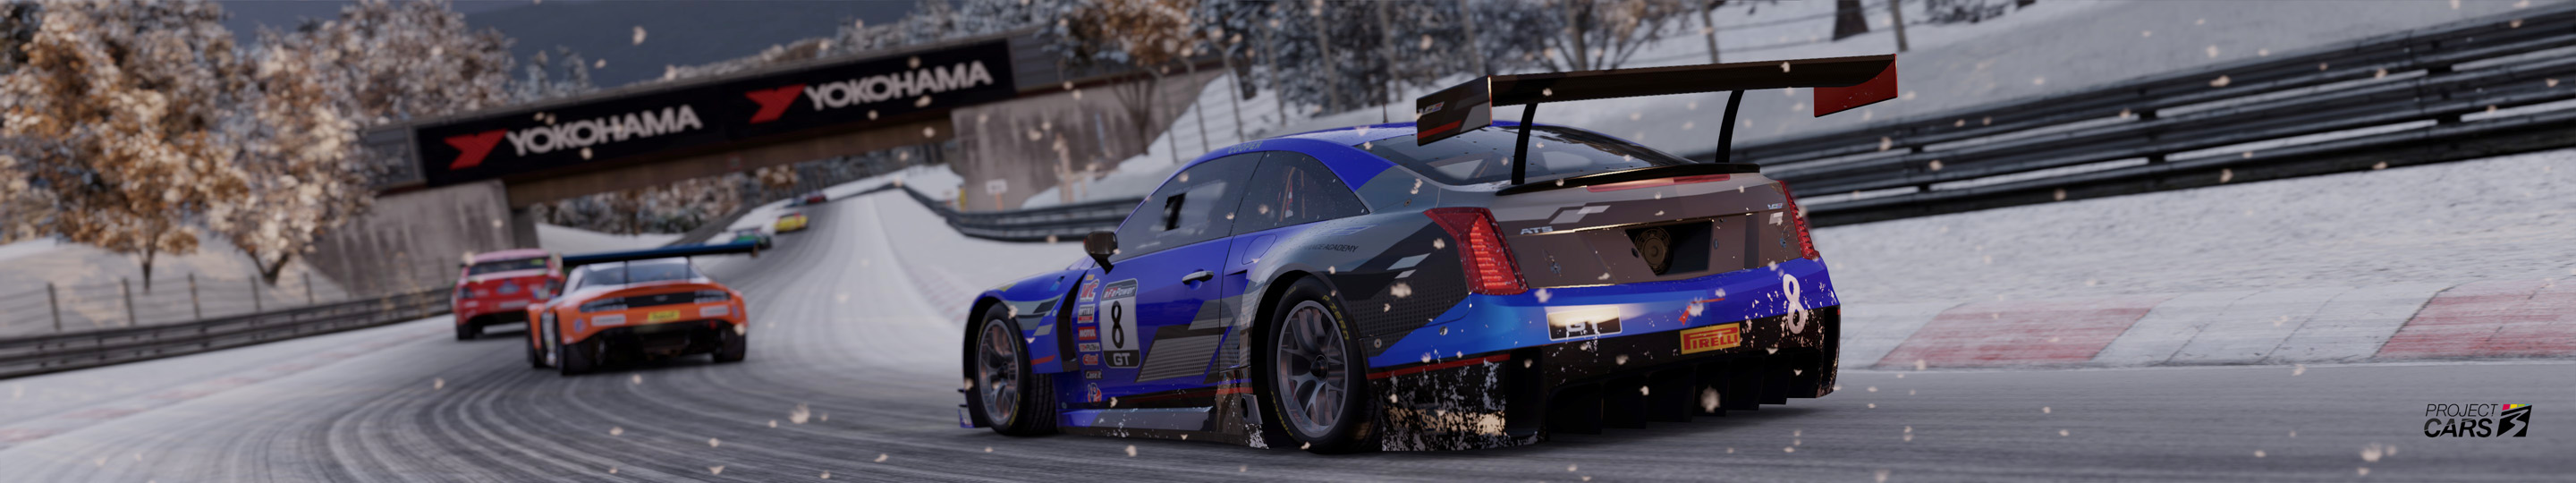 2 PROJECT CARS GT3 at NORDS Snow copy.jpg